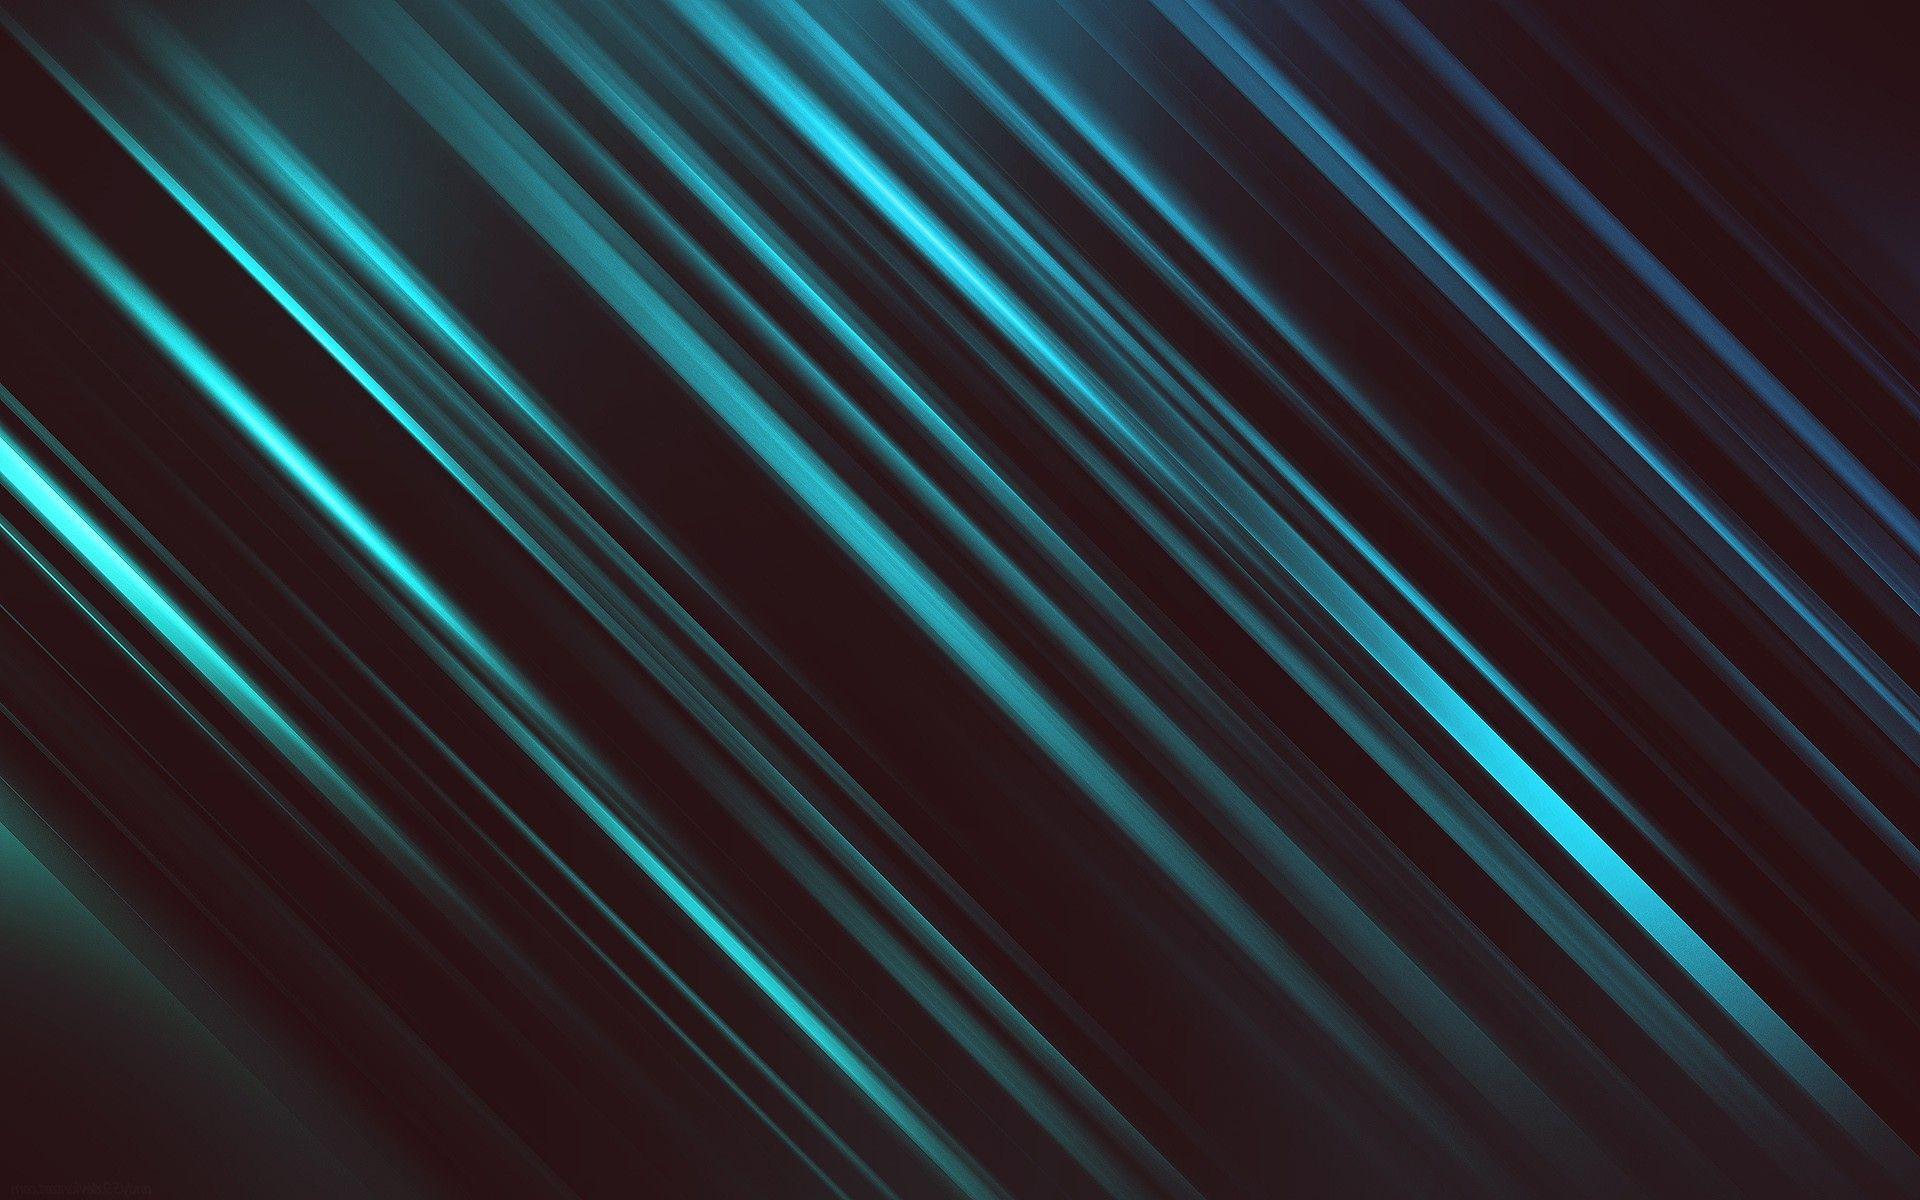 Black and Teal Wallpapers - Top Free Black and Teal Backgrounds